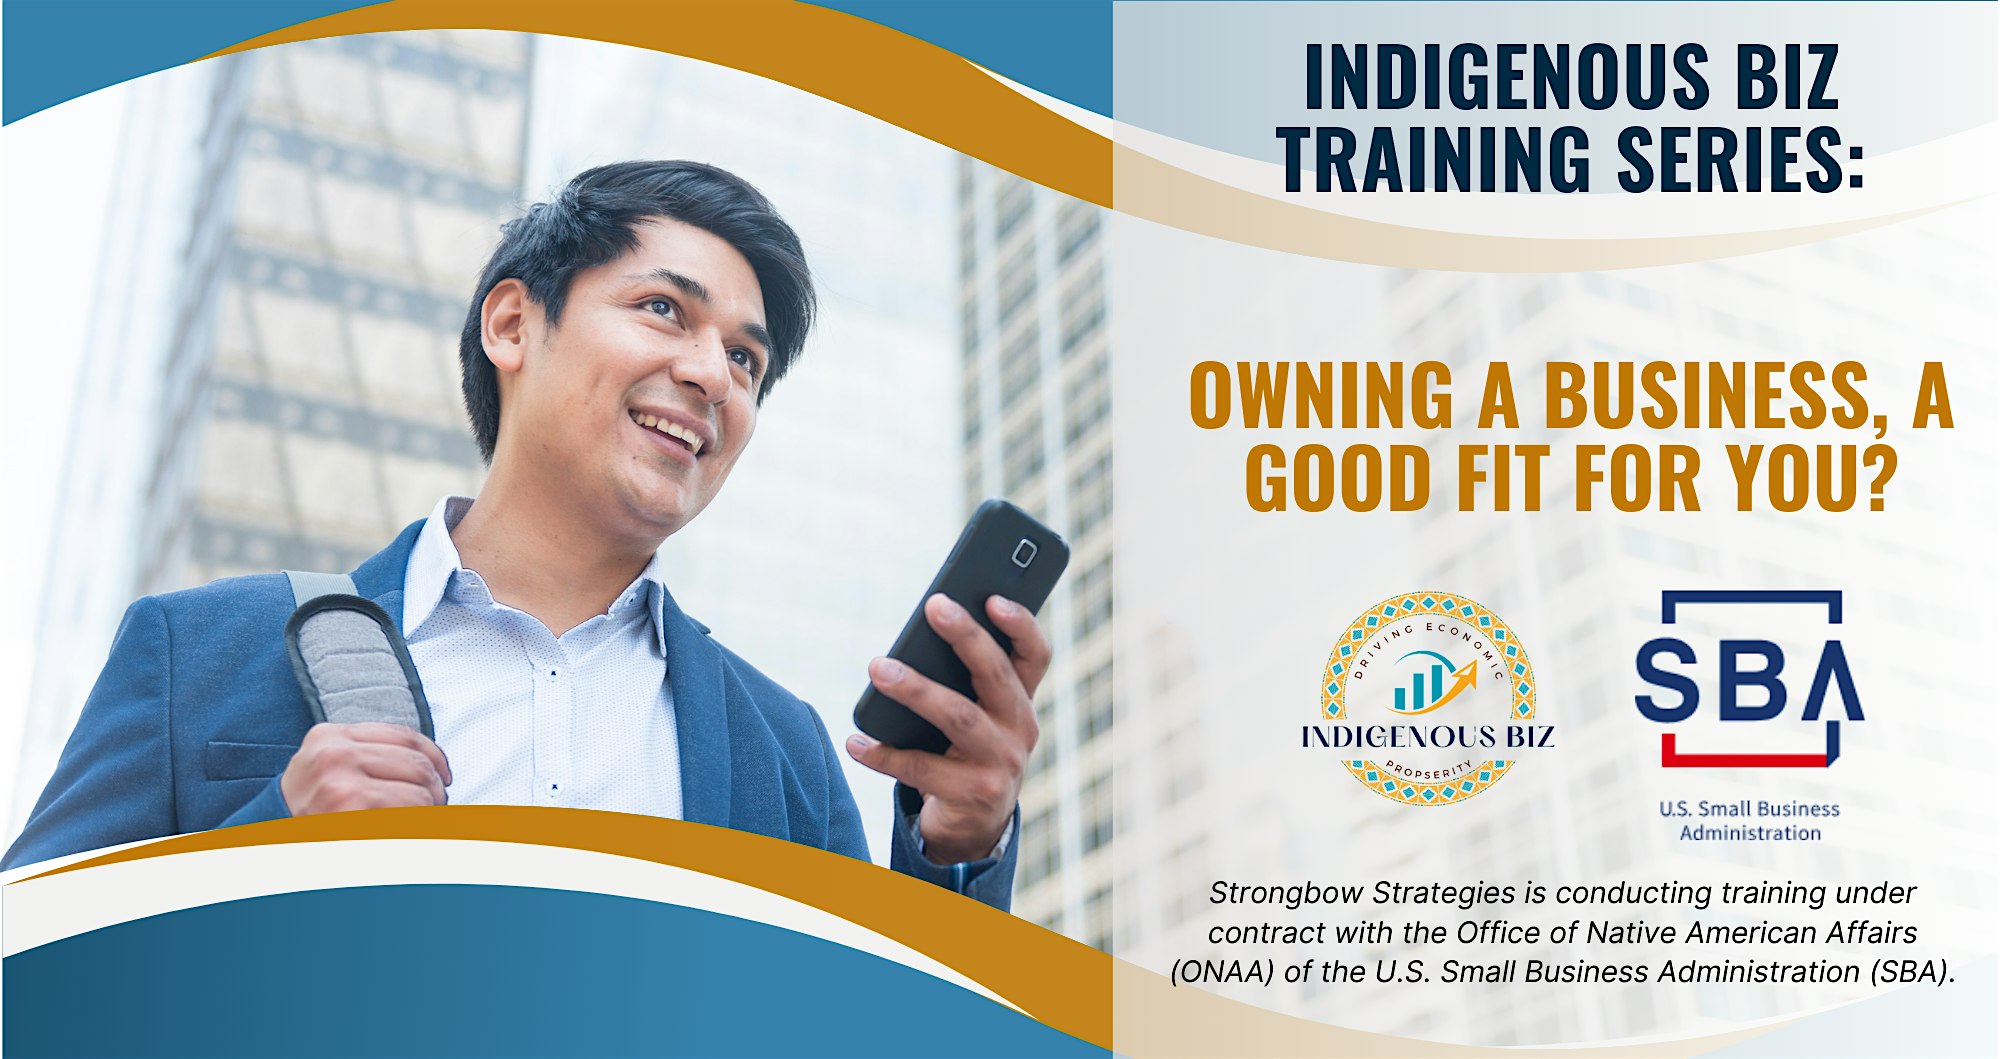 Indigenous Biz Training Series: Owning a Business, A Good Fit for You?